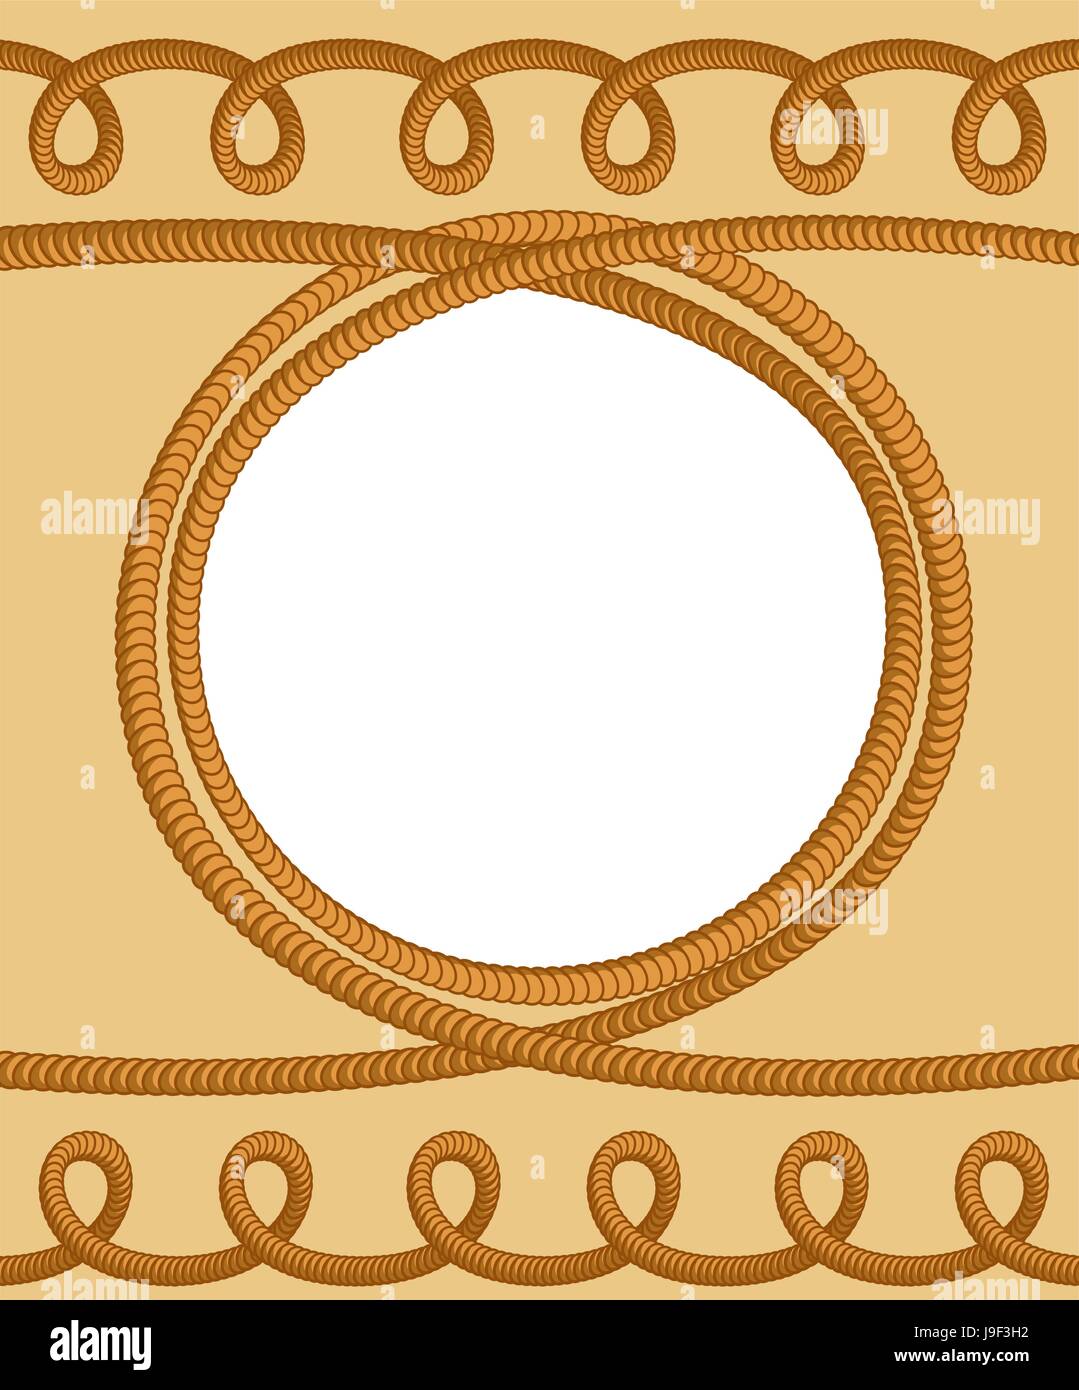 Rope rope. Curls and rings from rope. Thick braided rope and knots. Frame marine theme Stock Vector